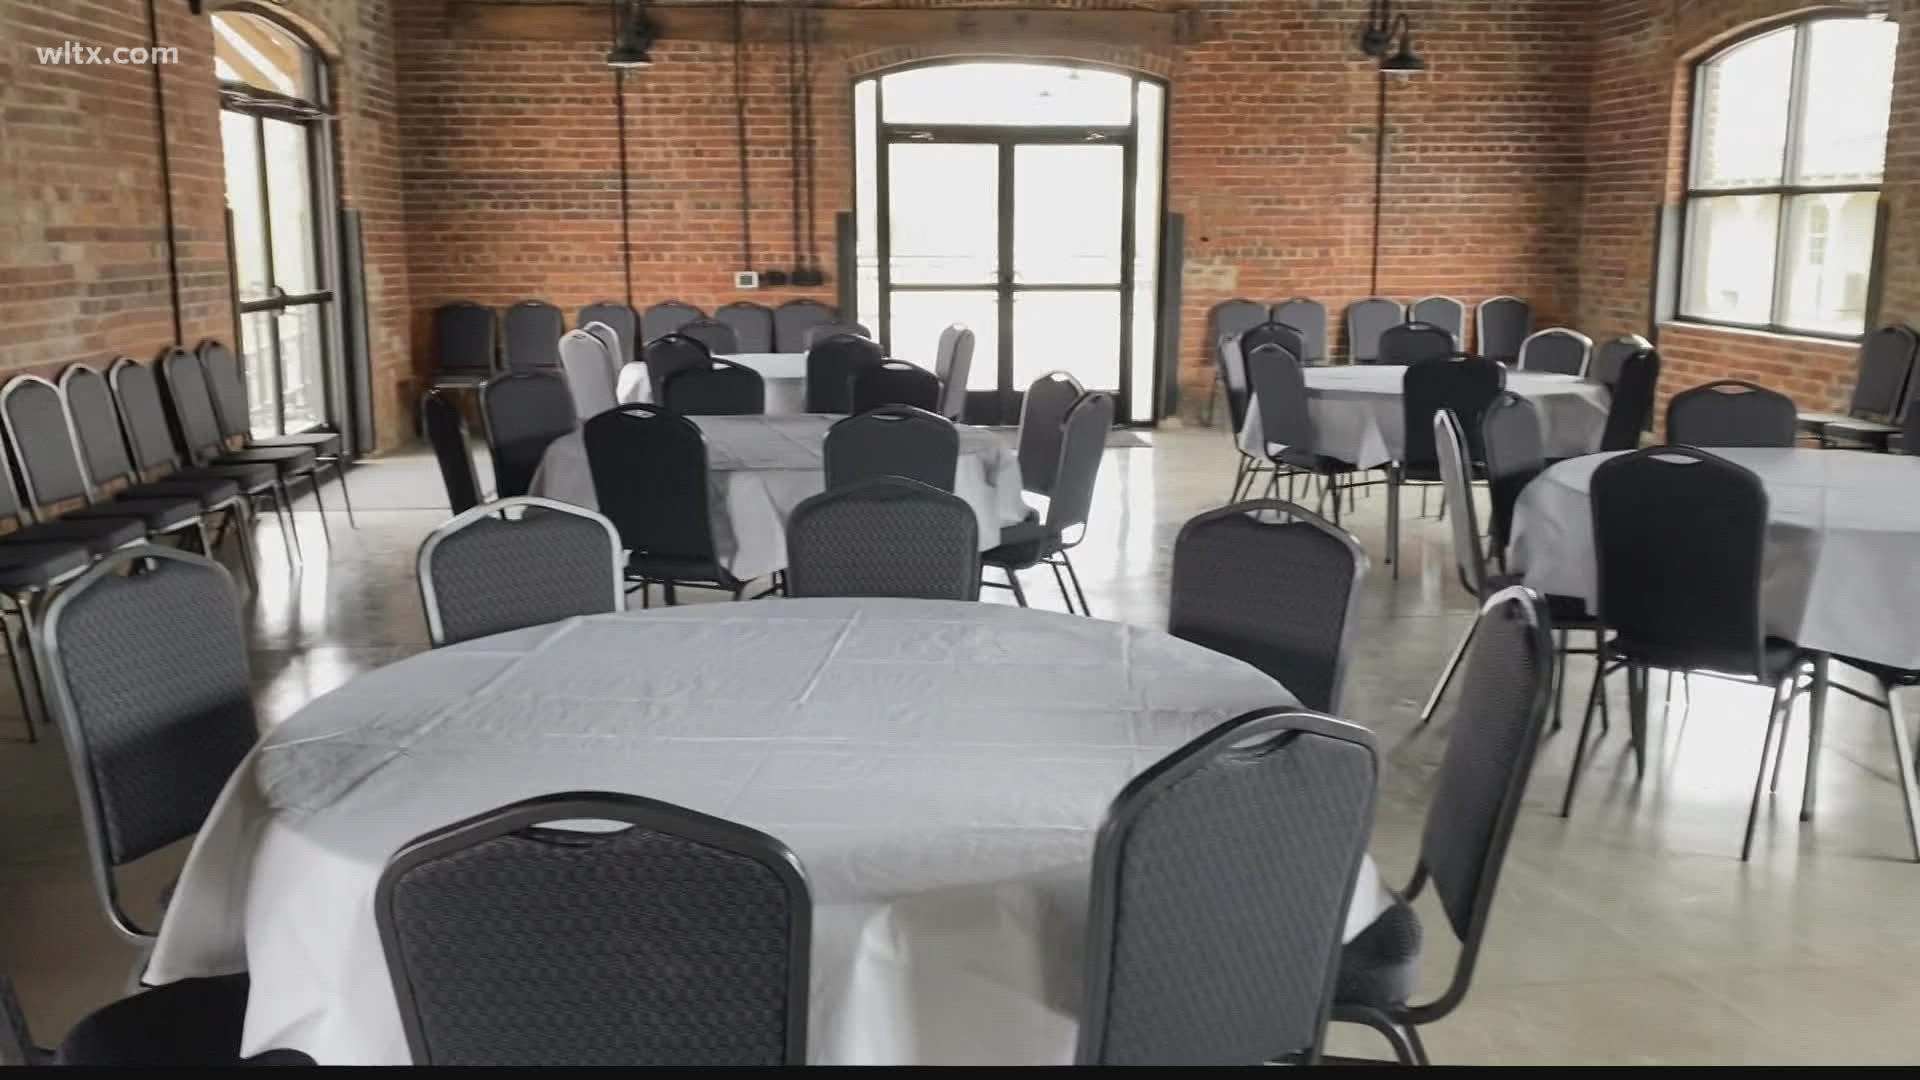 Orangeburg County residents will be able to rent the venue for $350 while people outside of the county will be able to rent the space for $450.